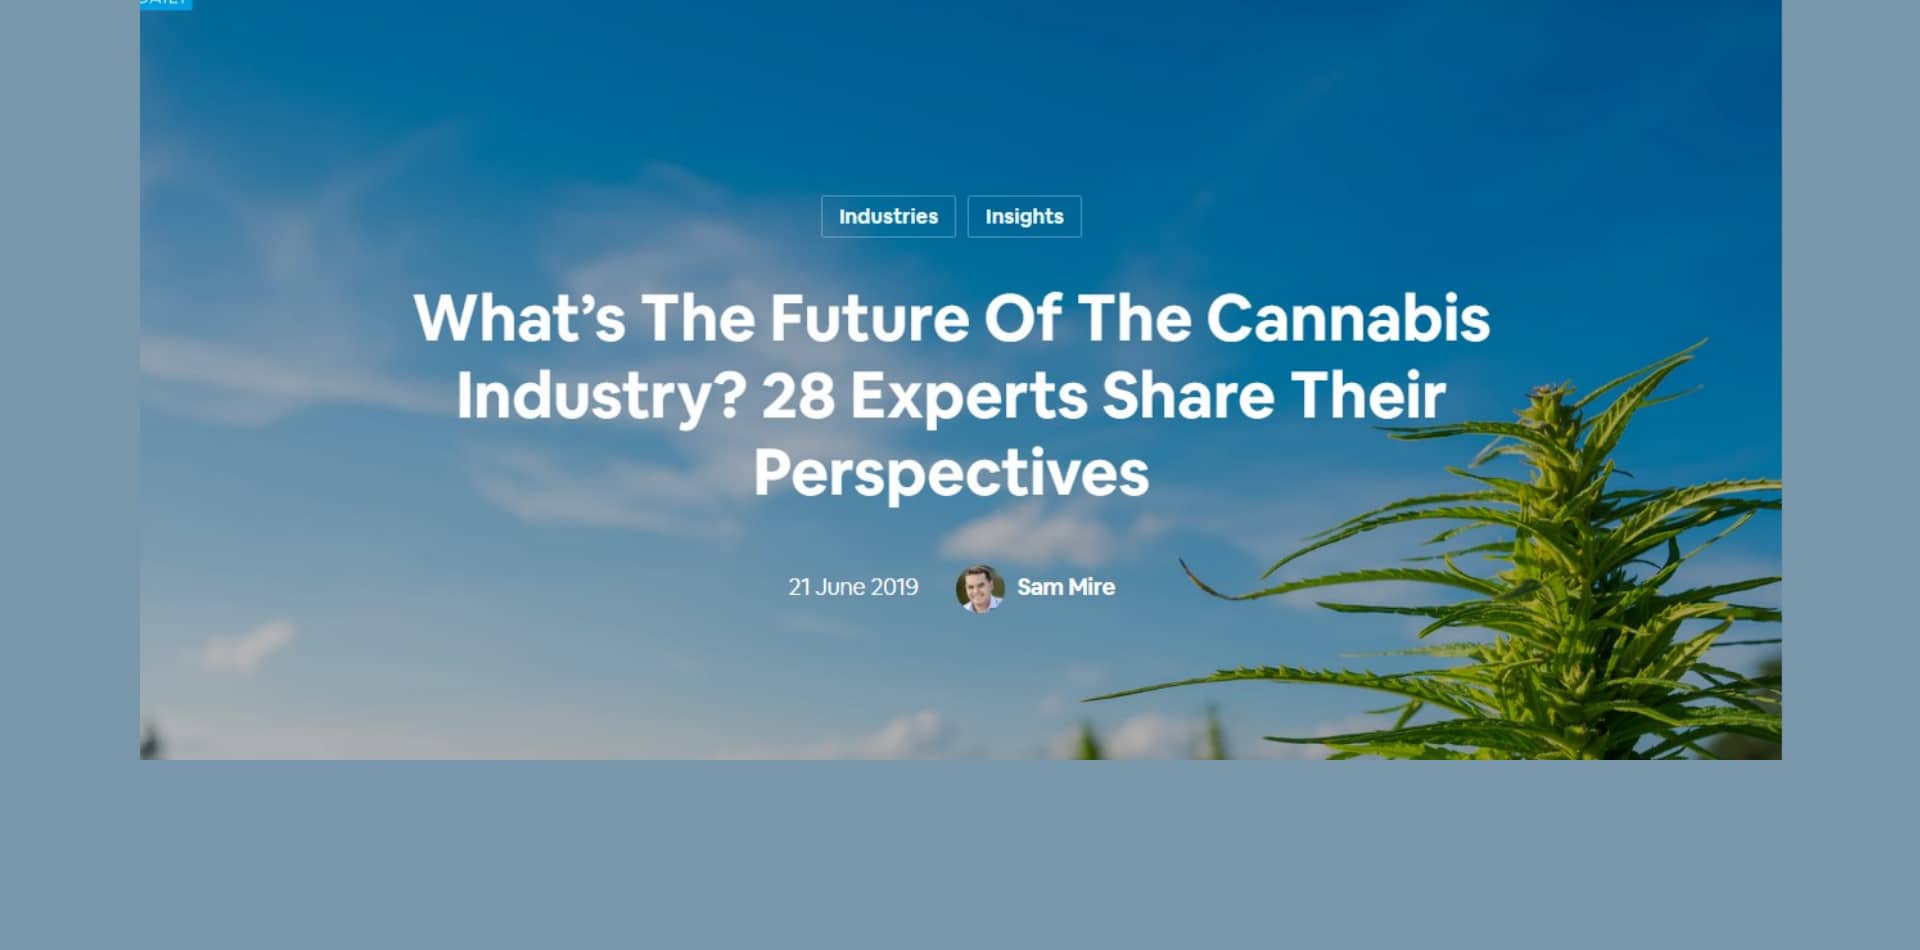 What’s The Future Of The Cannabis Industry? 28 Experts Share Their Perspectives